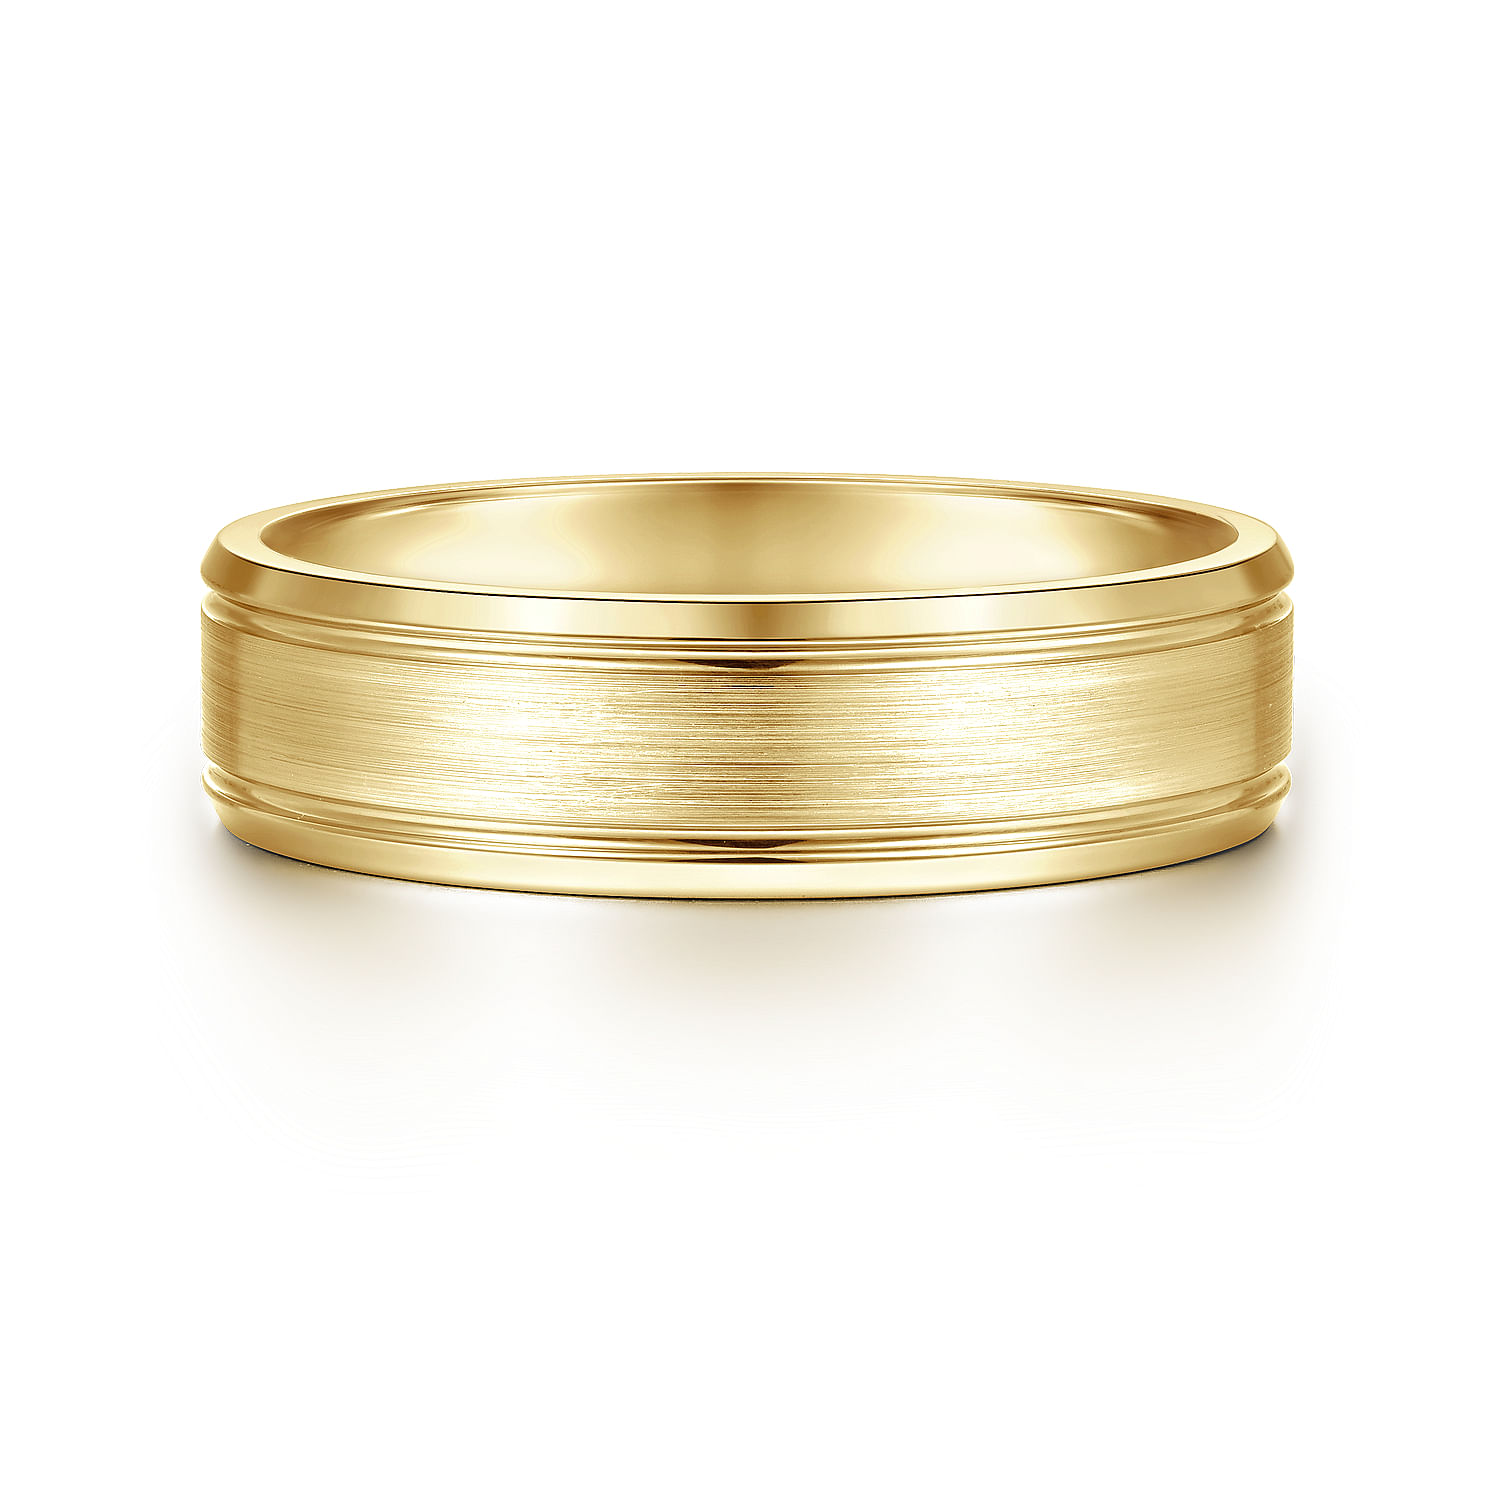 Charles - 14K Yellow Gold 6mm - Satin Channel Polished Edge Men's Wedding Band